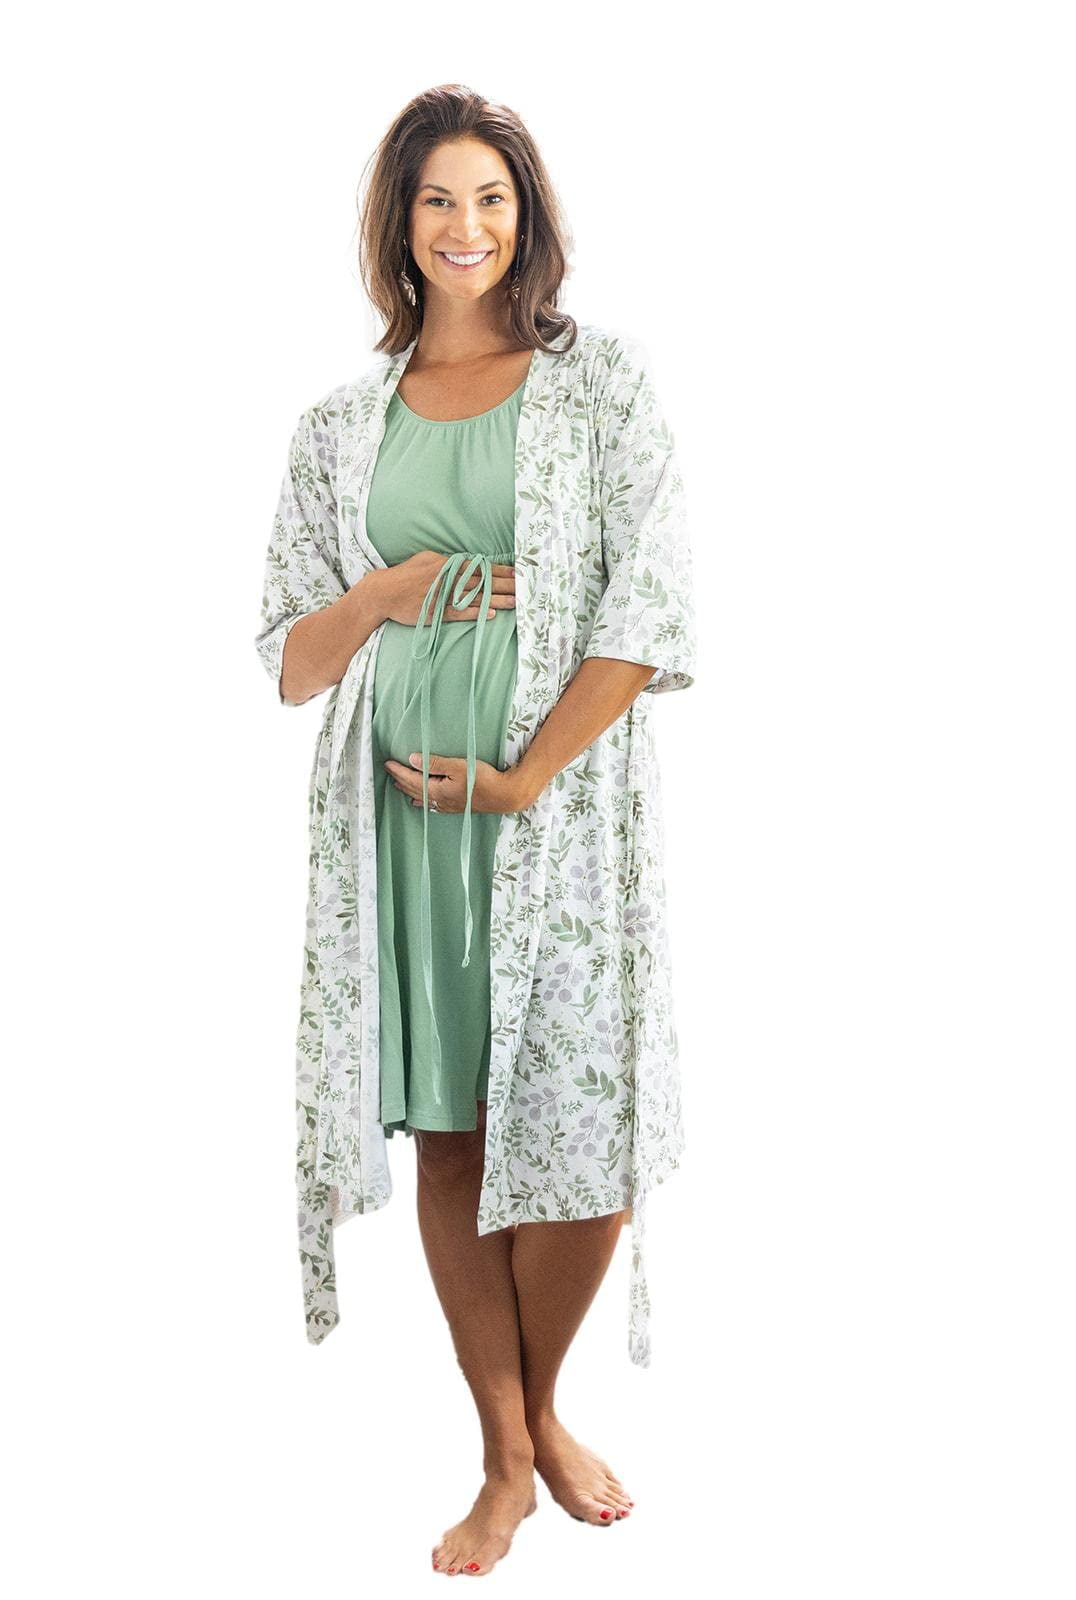 Kindred Bravely Universal Labor And Delivery Gown | 3 In 1 Labor, Delivery,  Nursing Gown For Hospital - Black, XL/XXL | Babylist Shop